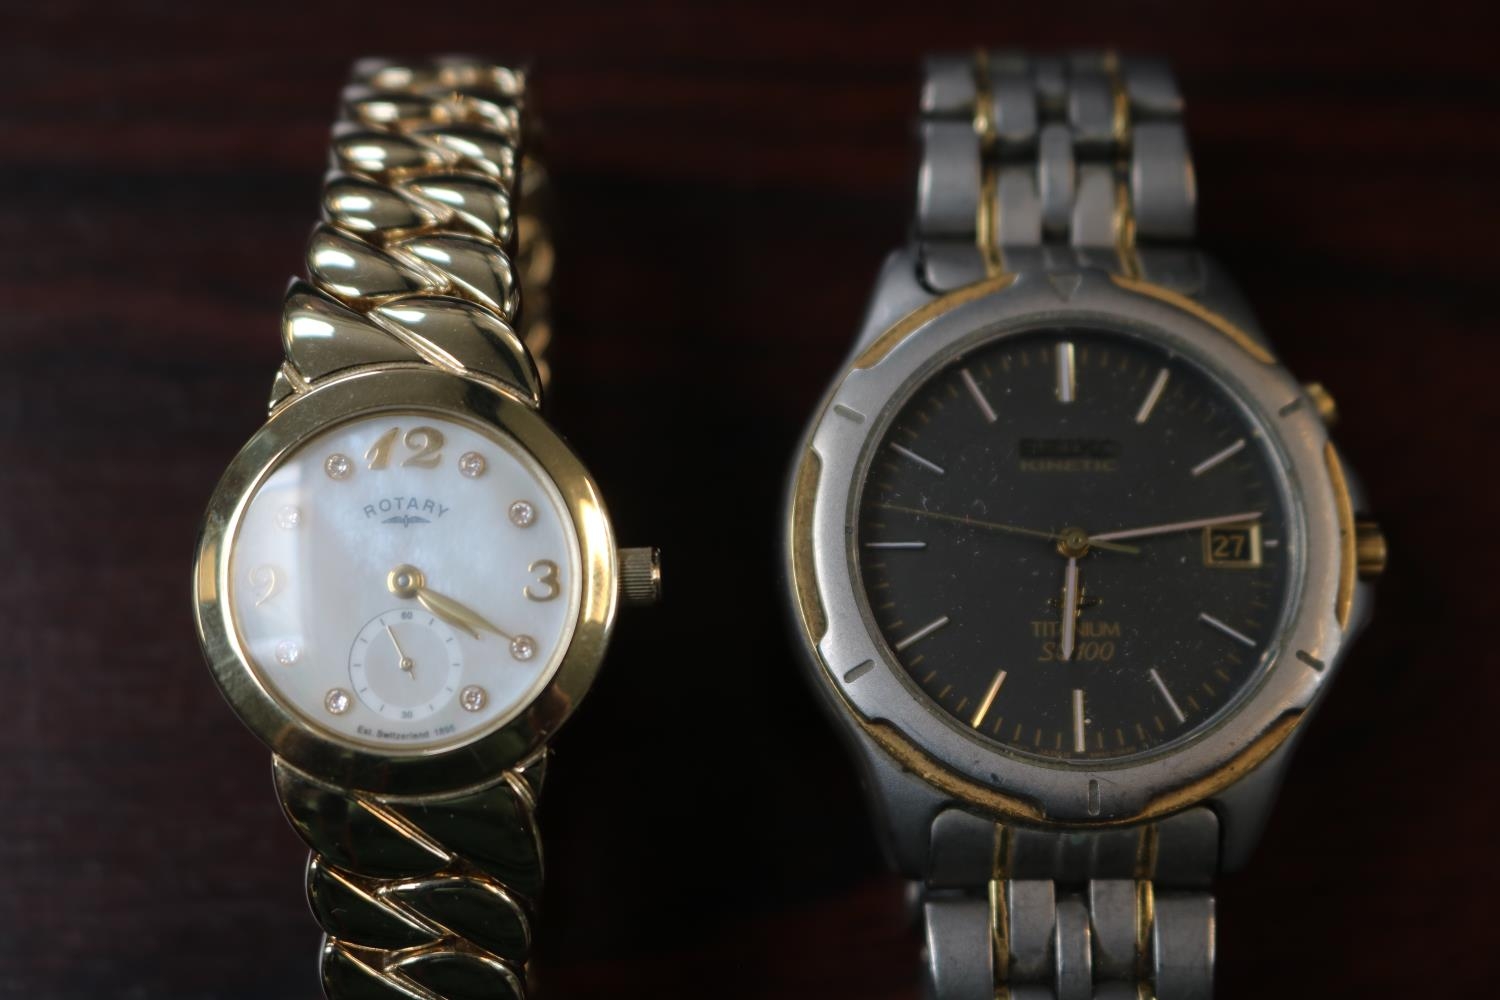 Ladies Boxed Rotary Wristwatch and a Gents Seiko Kinetic Wristwatch